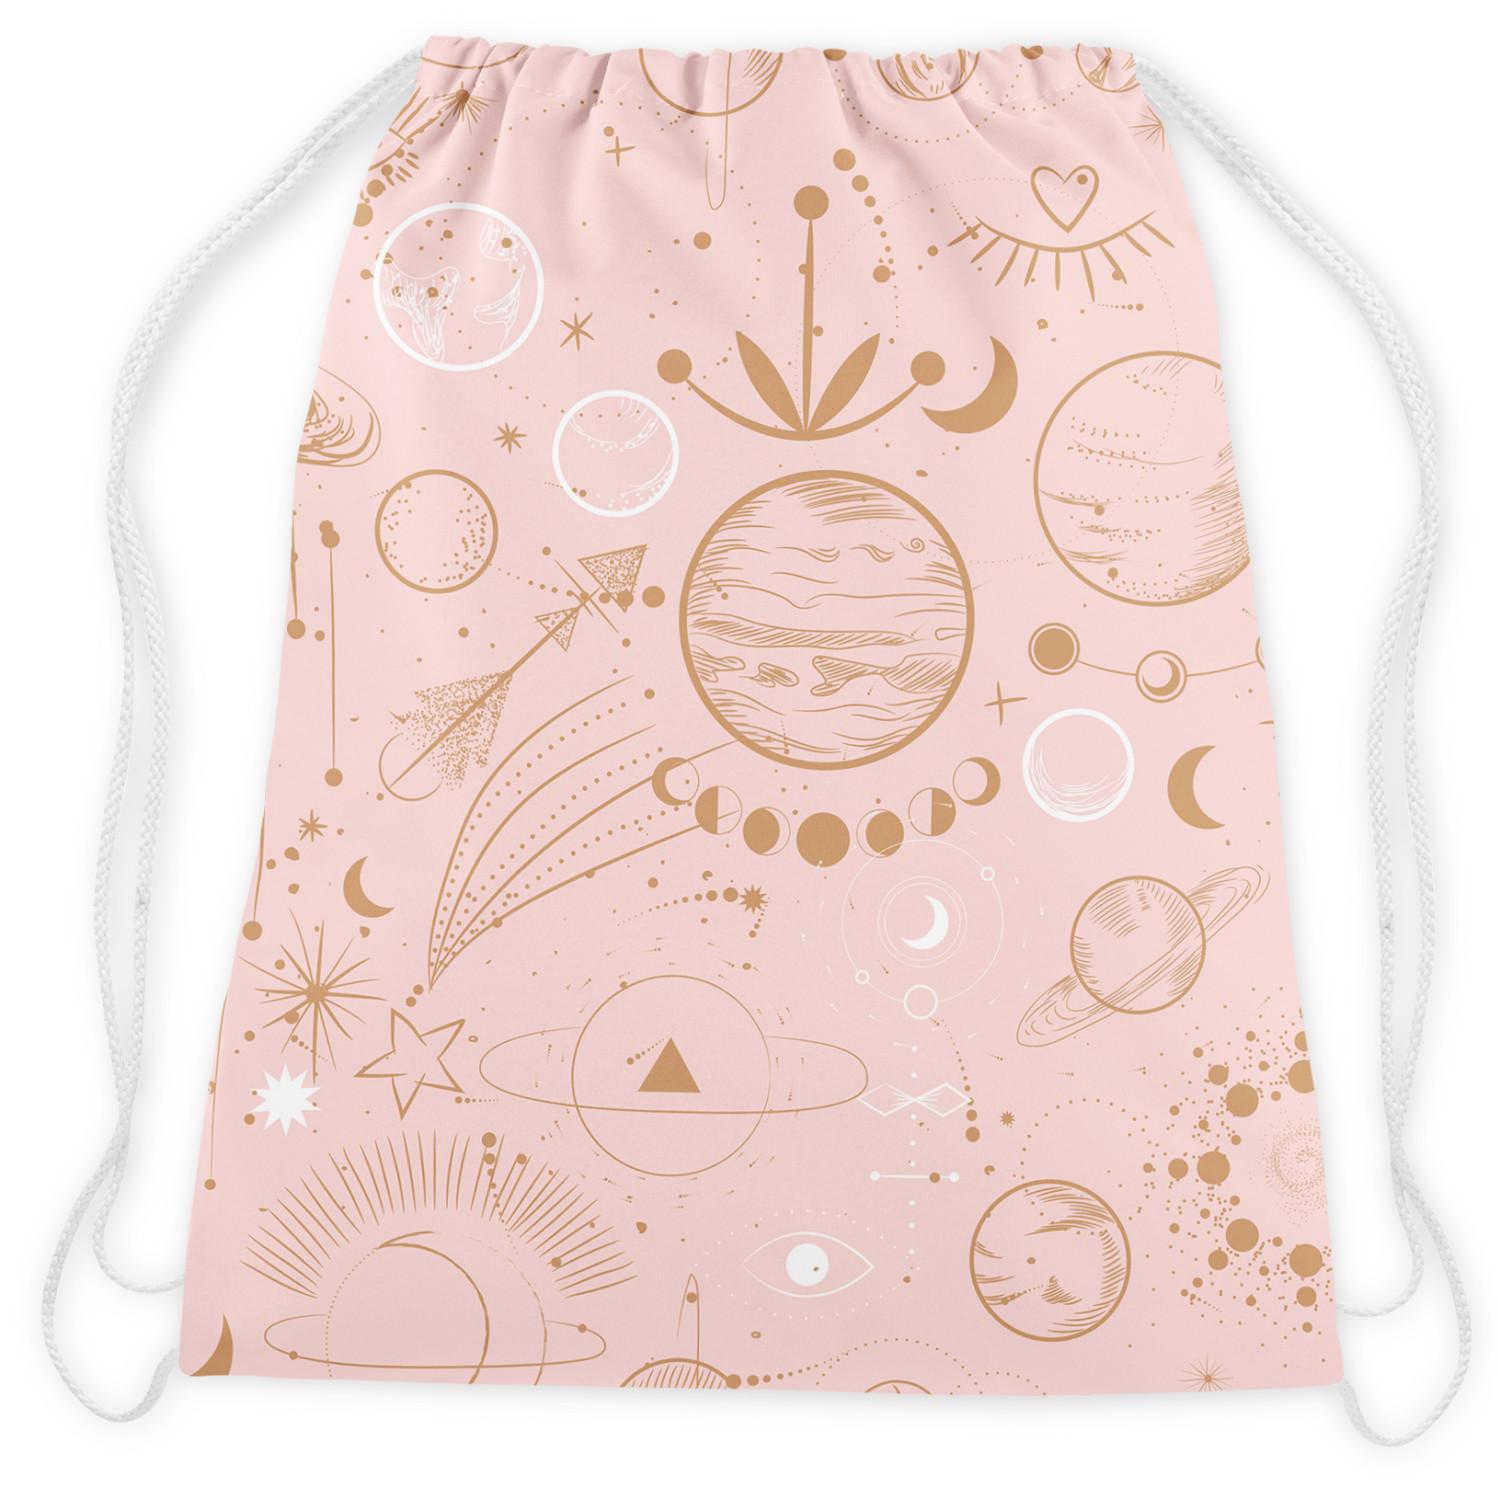 Backpack Abstract cosmos - planets, moon, stars on pink background